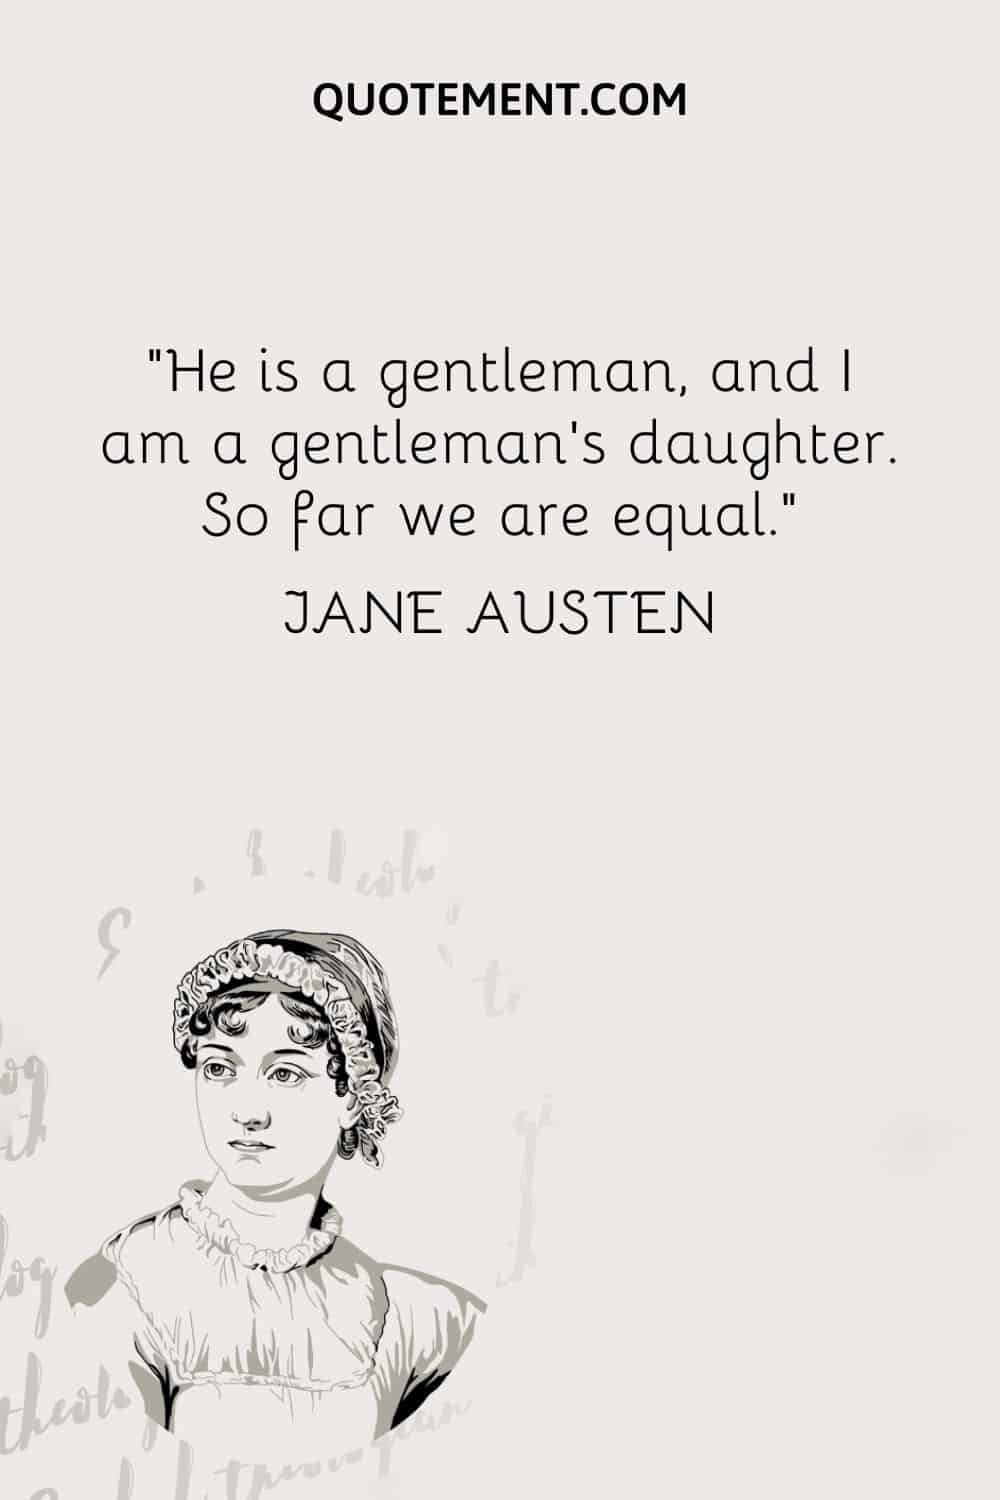 He is a gentleman, and I am a gentleman's daughter. So far we are equal. — Jane Austen